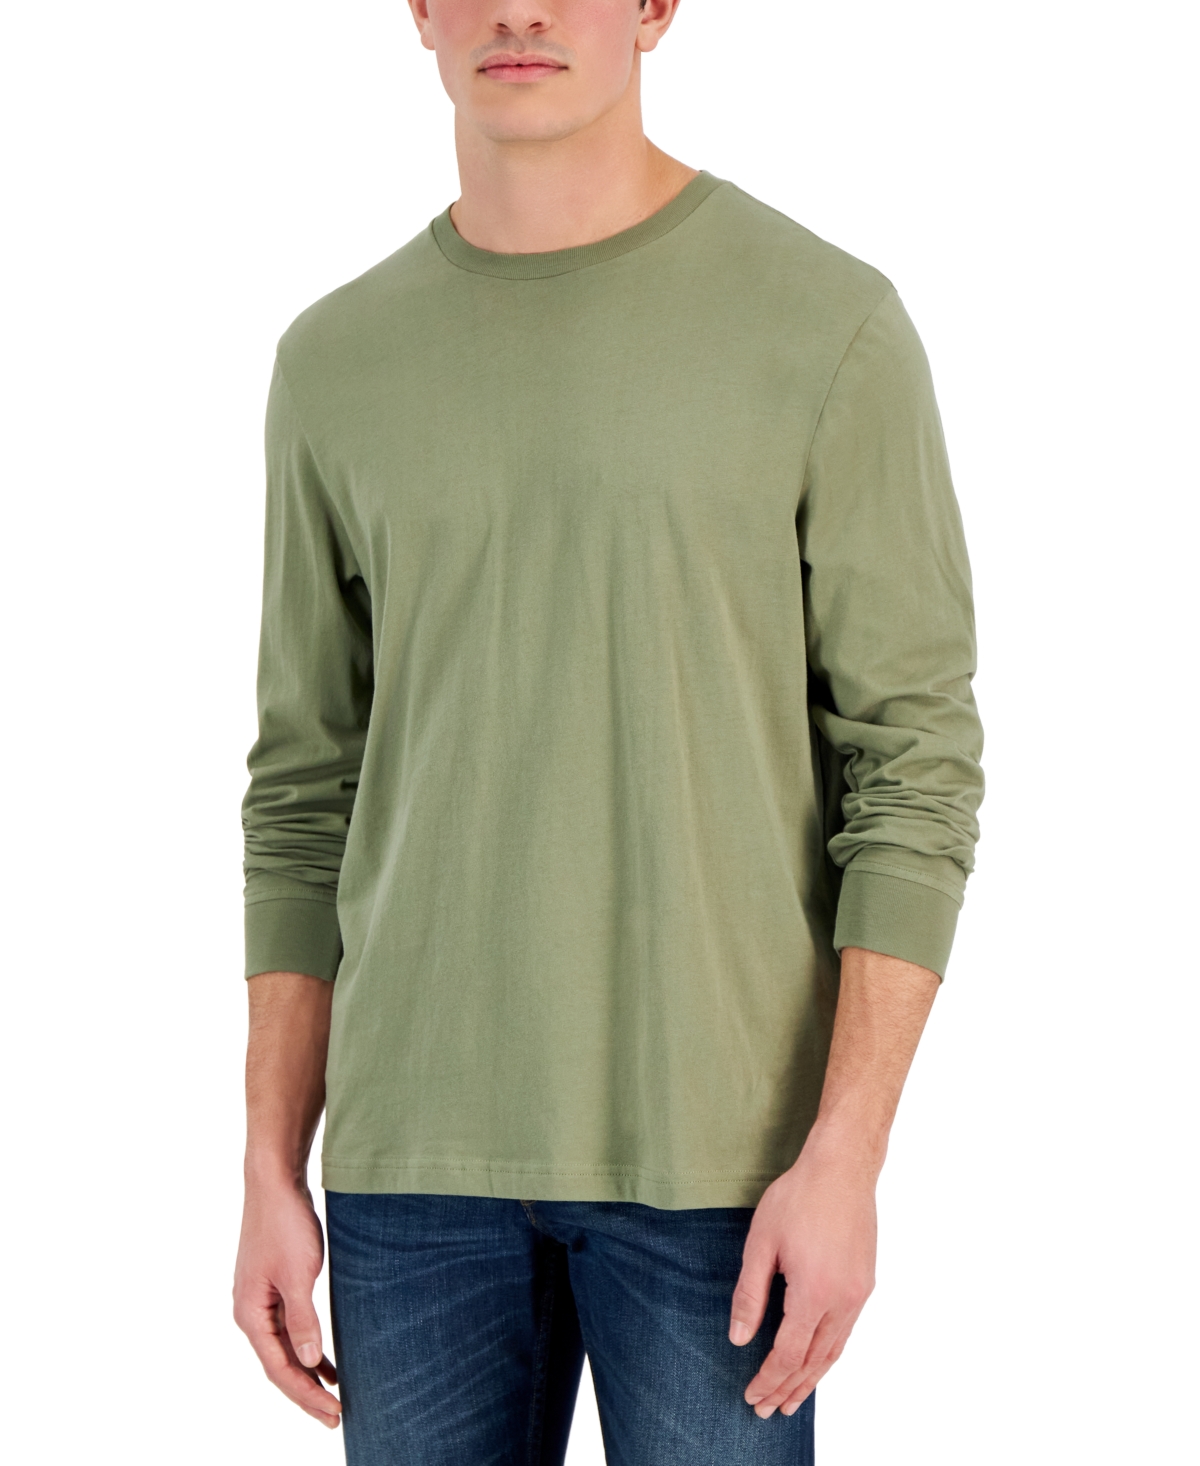 Club Room Men's Long Sleeve T-shirt, Created For Macy's In Olive Tint